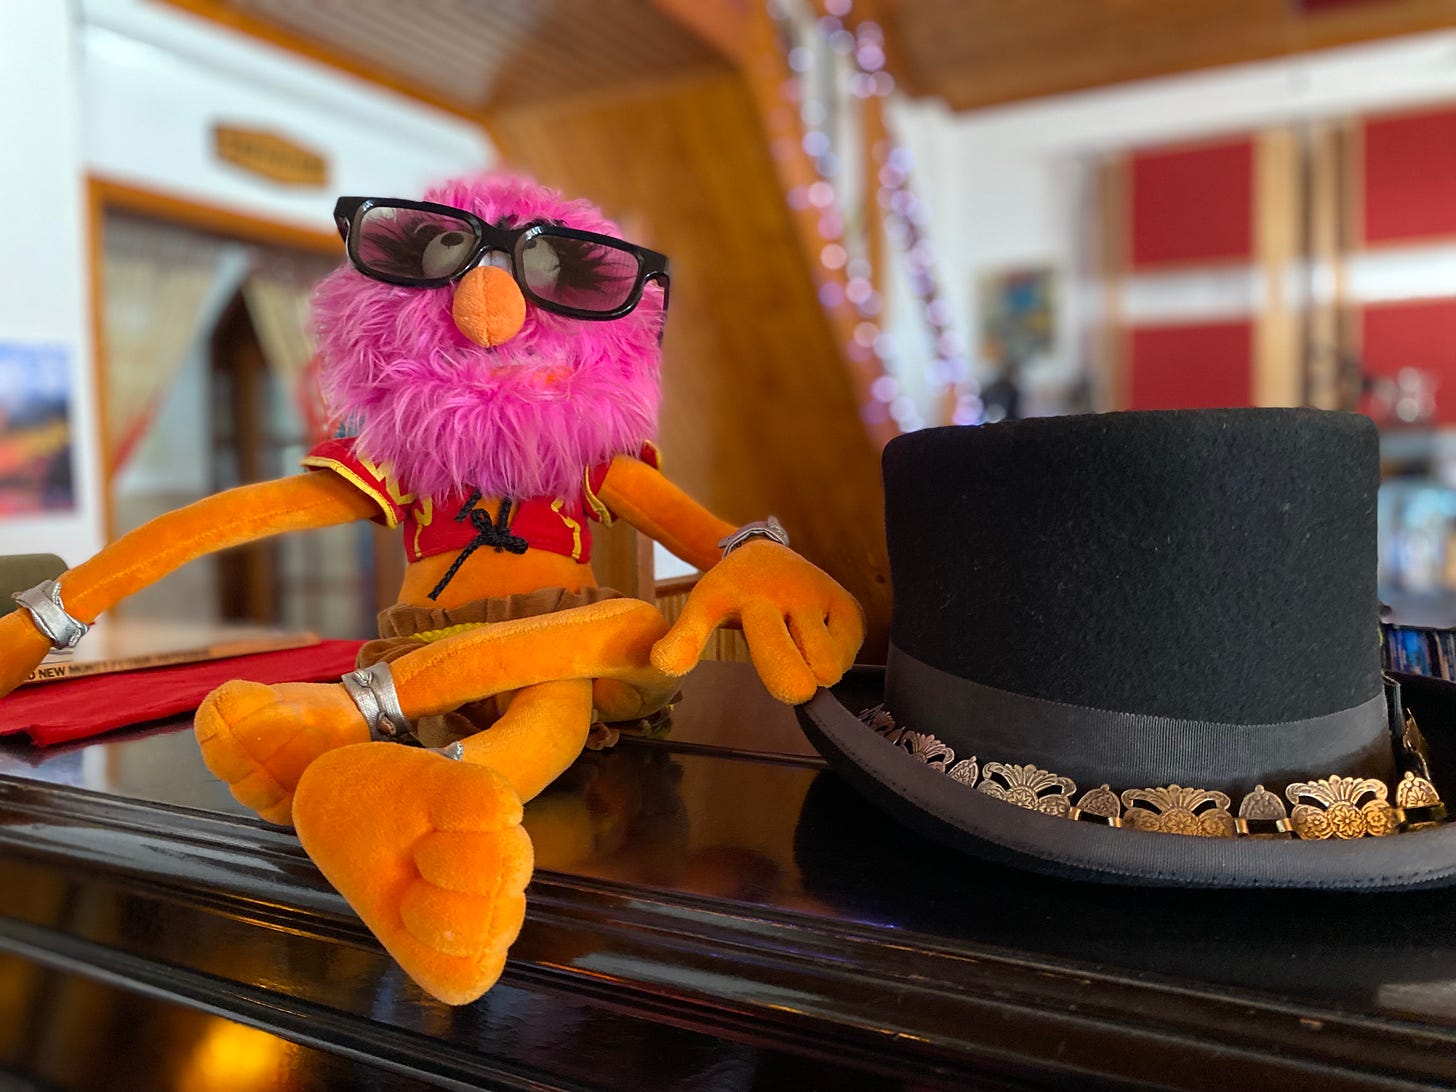 Animal from the Muppets wearing sunglasses sat next to a top hat in the Supertone studio, Samora Correia, Portugal